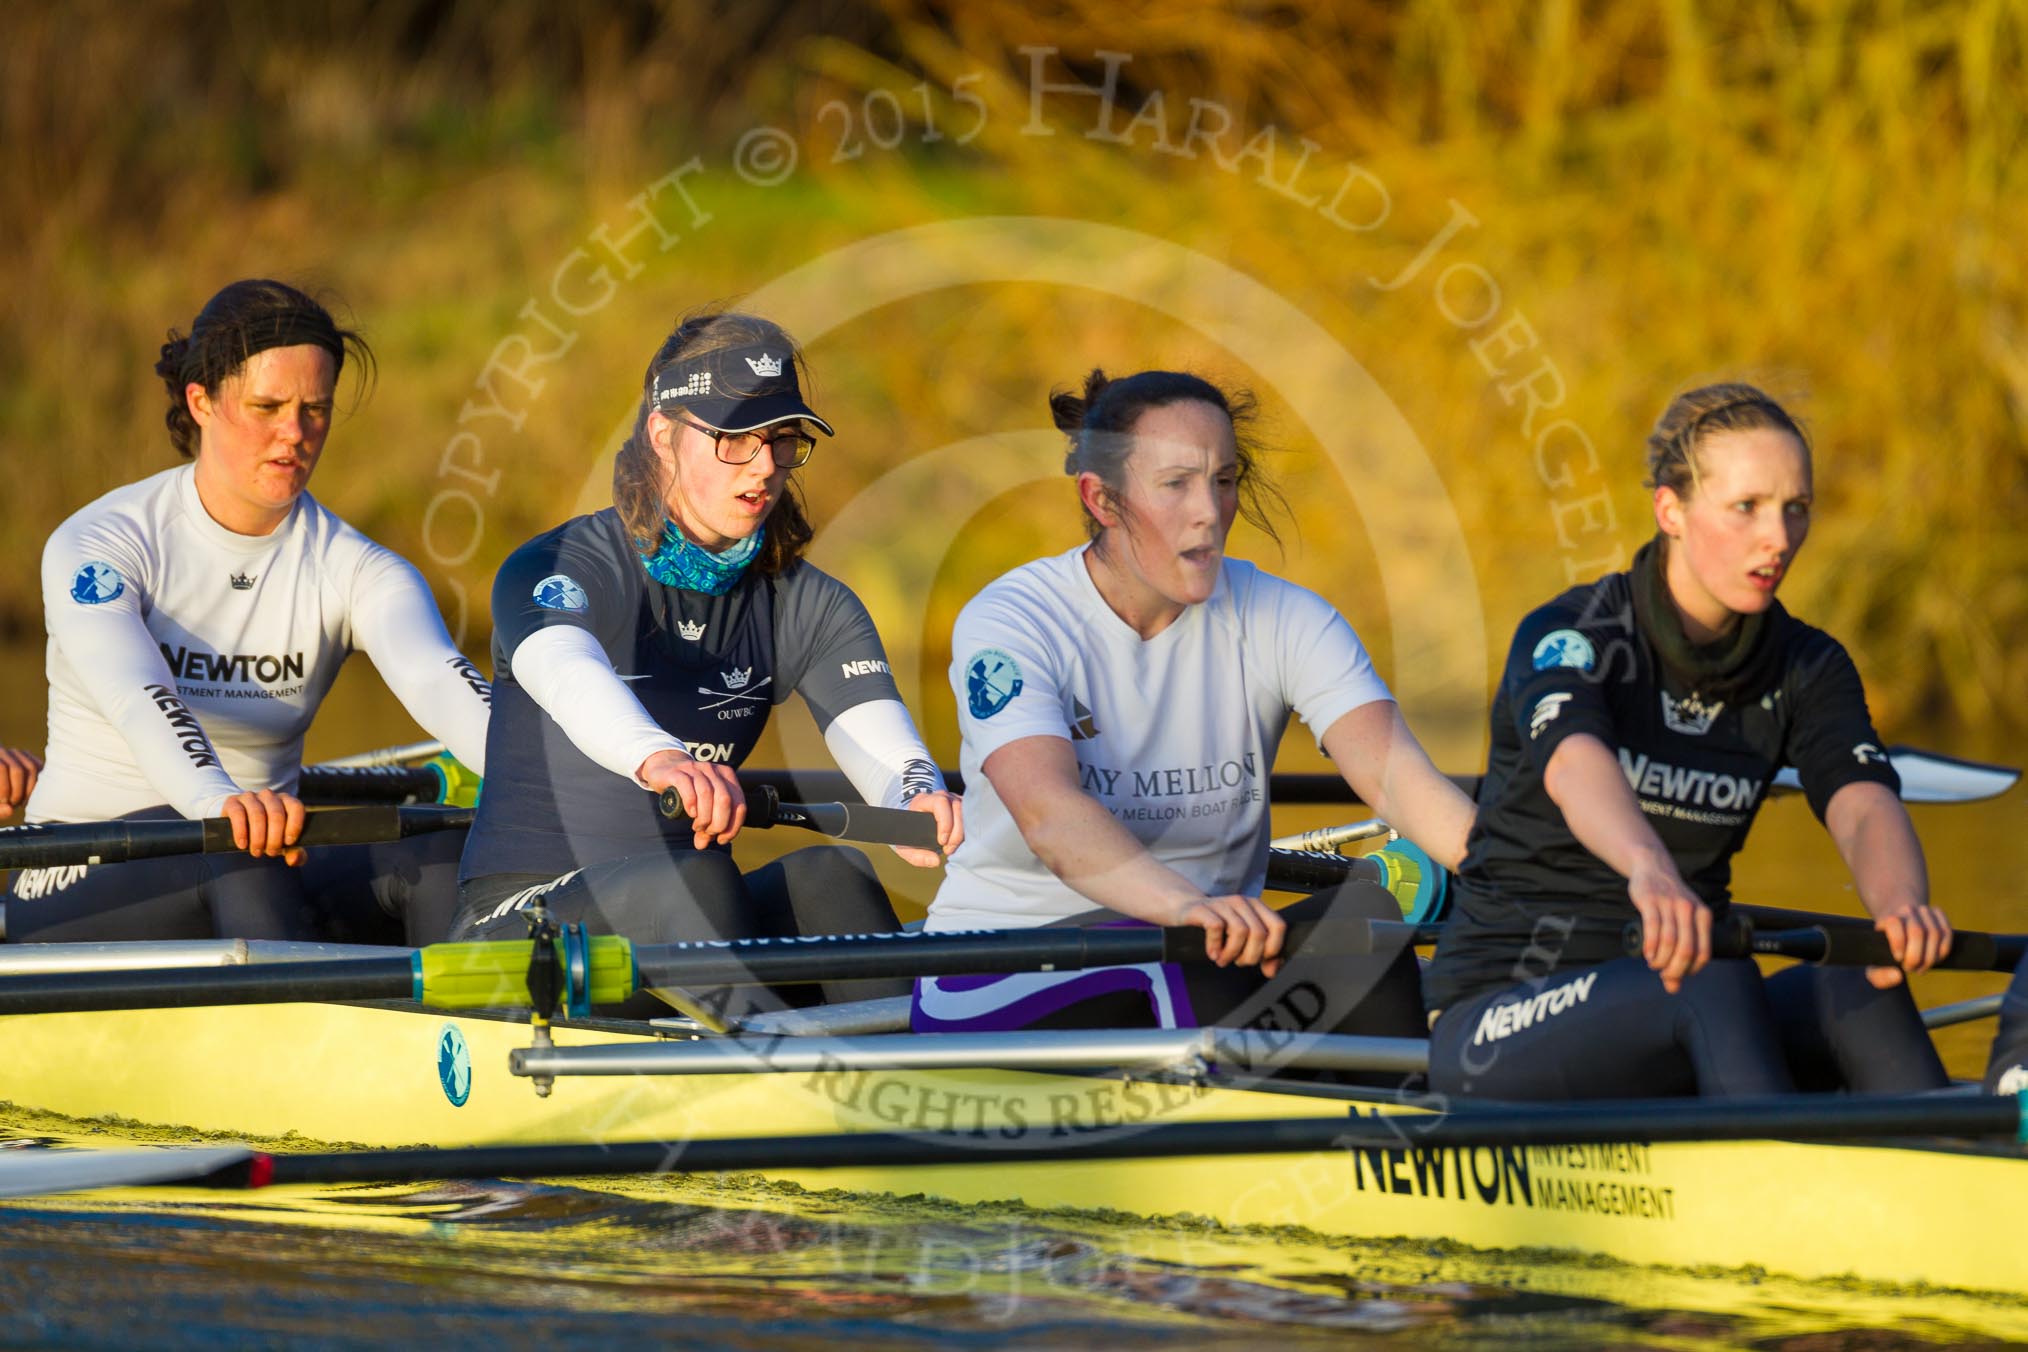 The Boat Race season 2015: OUWBC training Wallingford.

Wallingford,

United Kingdom,
on 04 March 2015 at 17:10, image #263